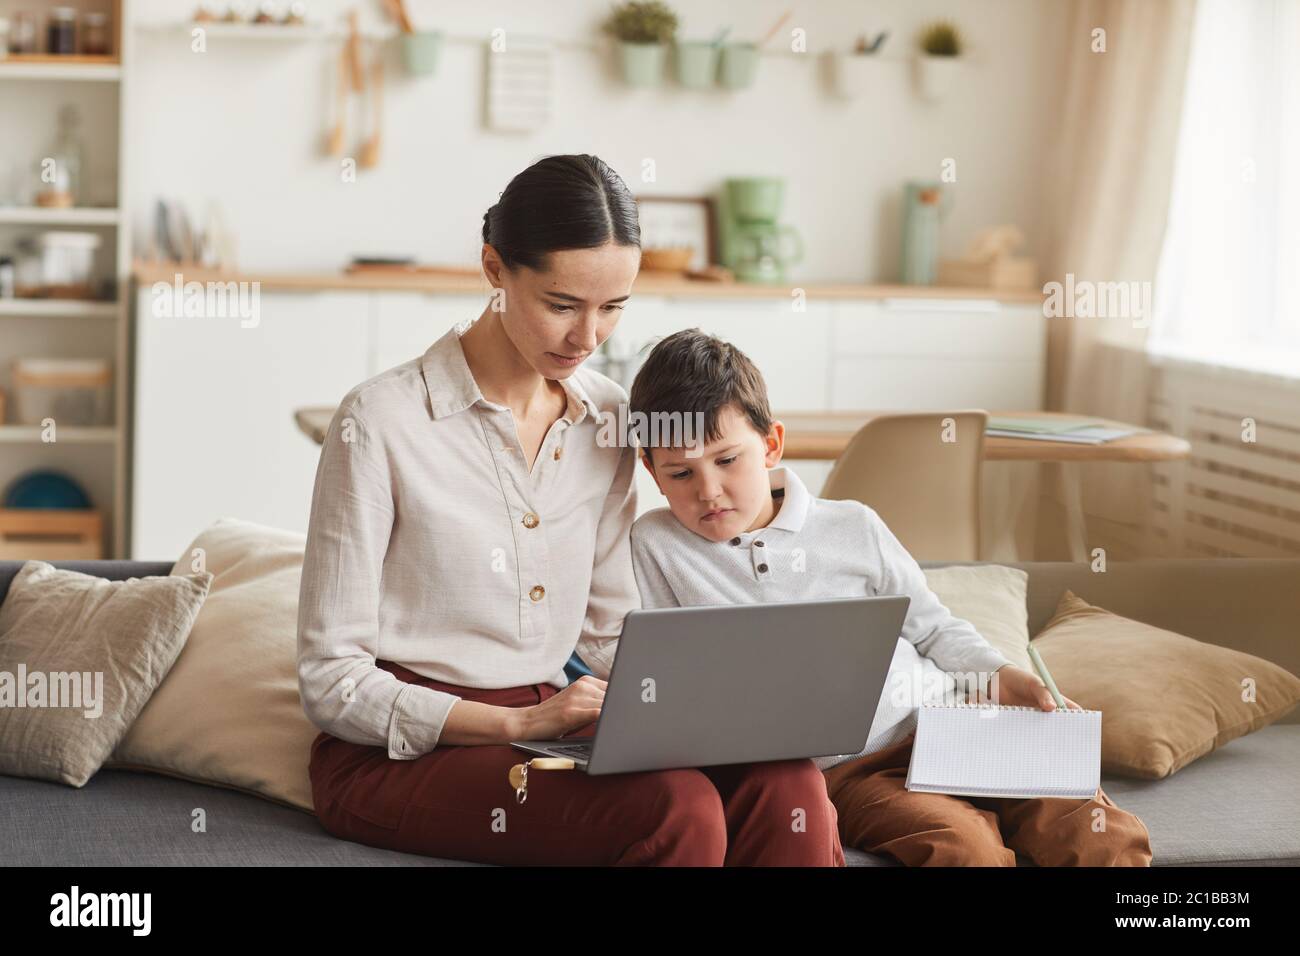 Warm-toned portrait of elegant young mother and son using laptop while studying at home in cozy interior, copy space Stock Photo